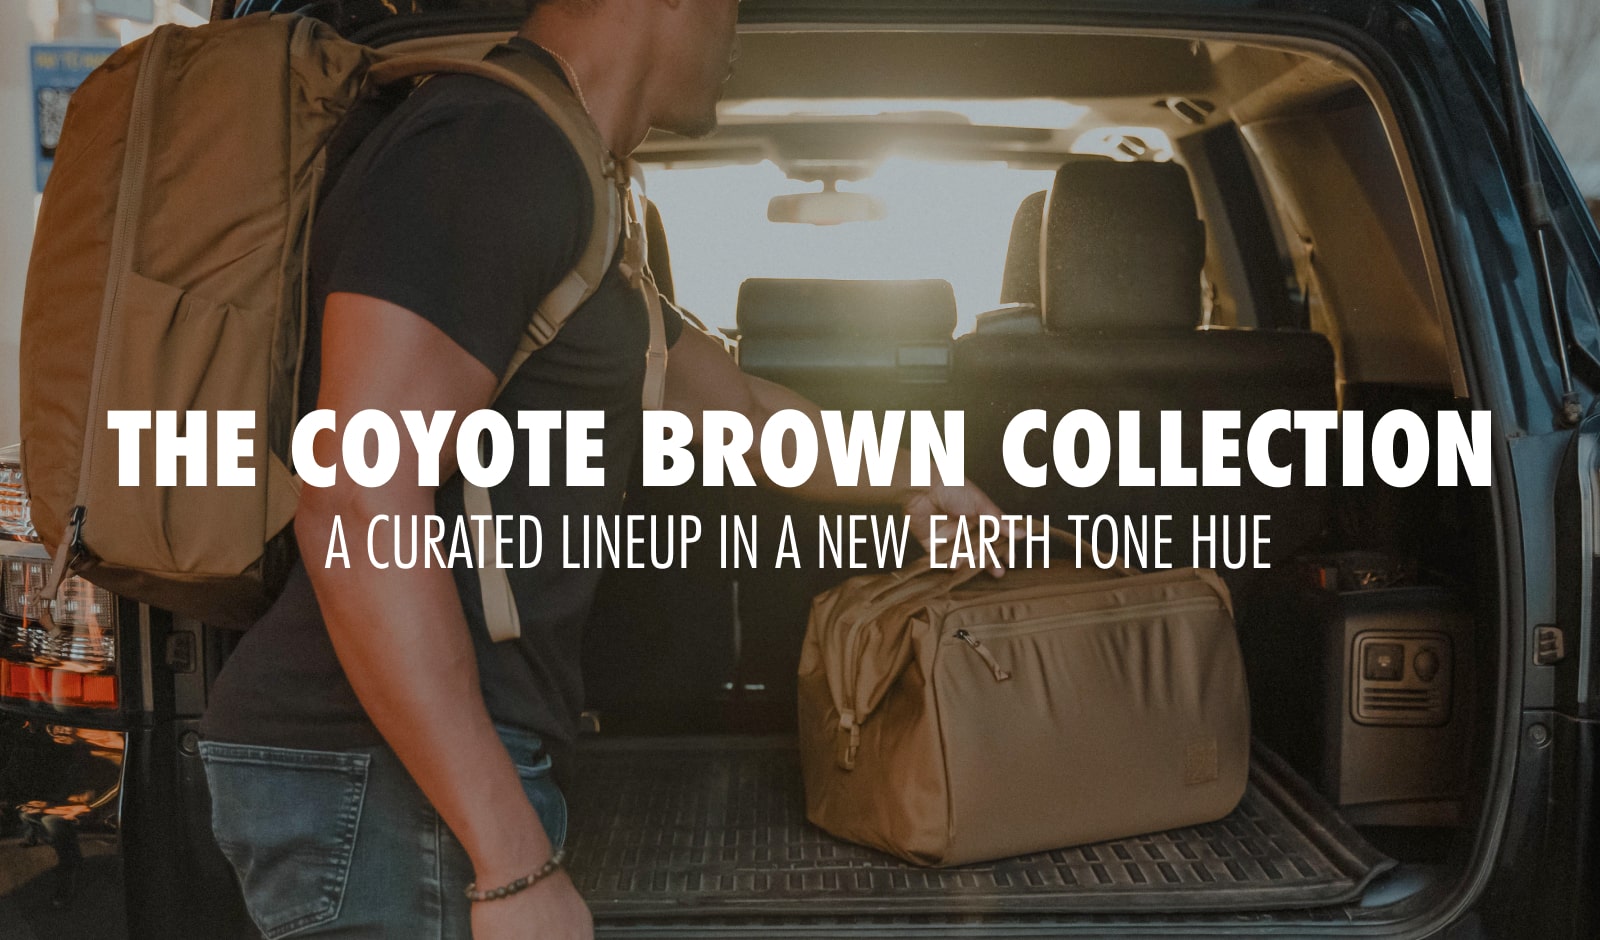 The Coyote Brown Collection